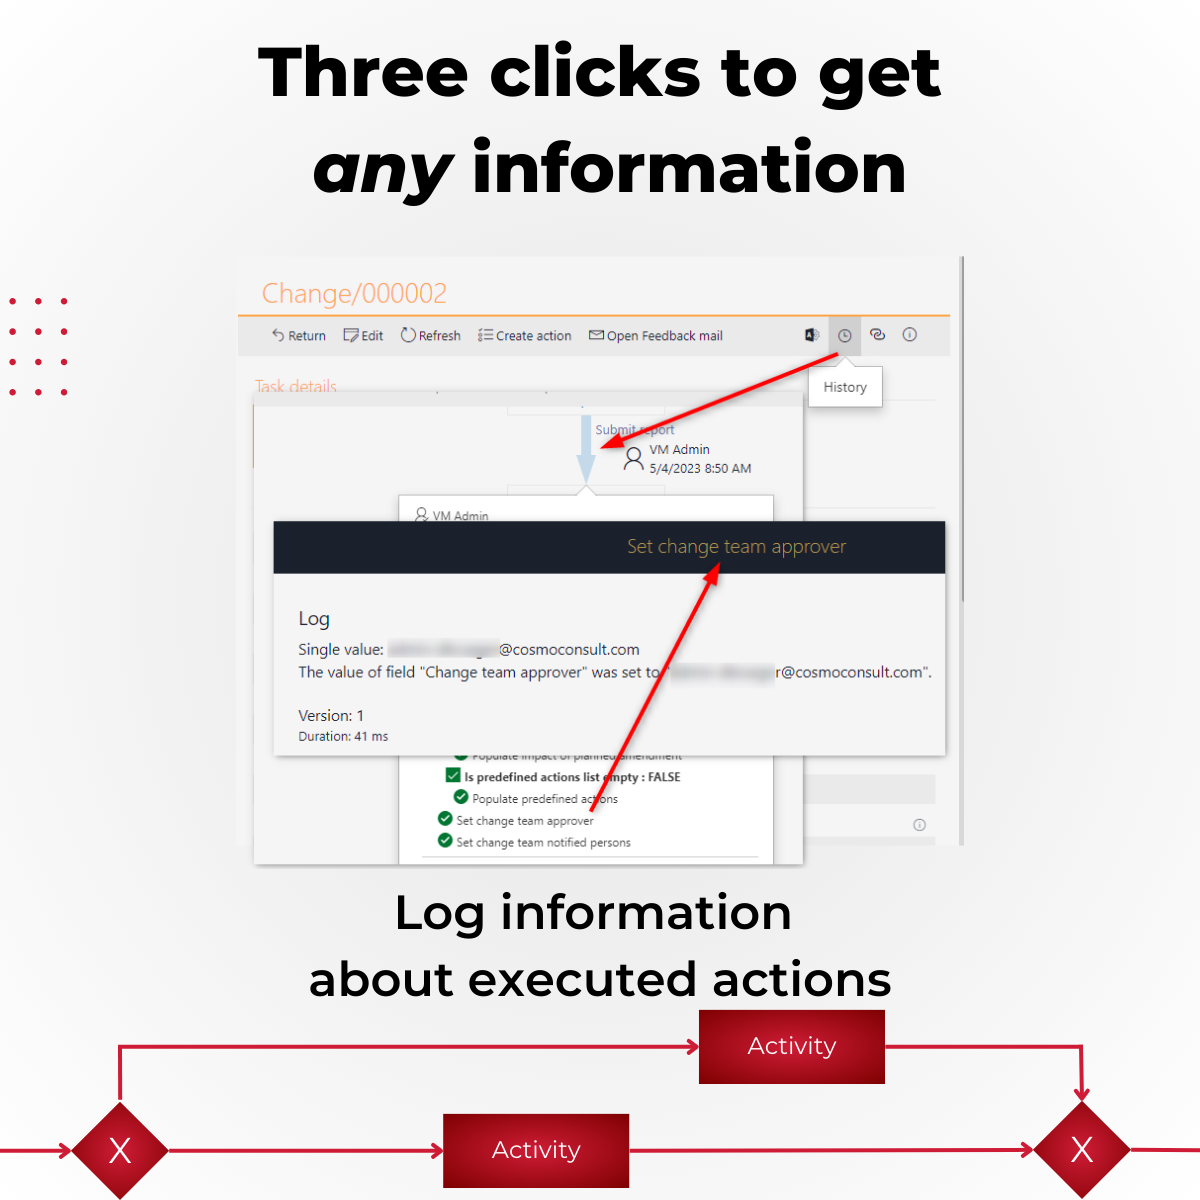 Log information are available with three clicks